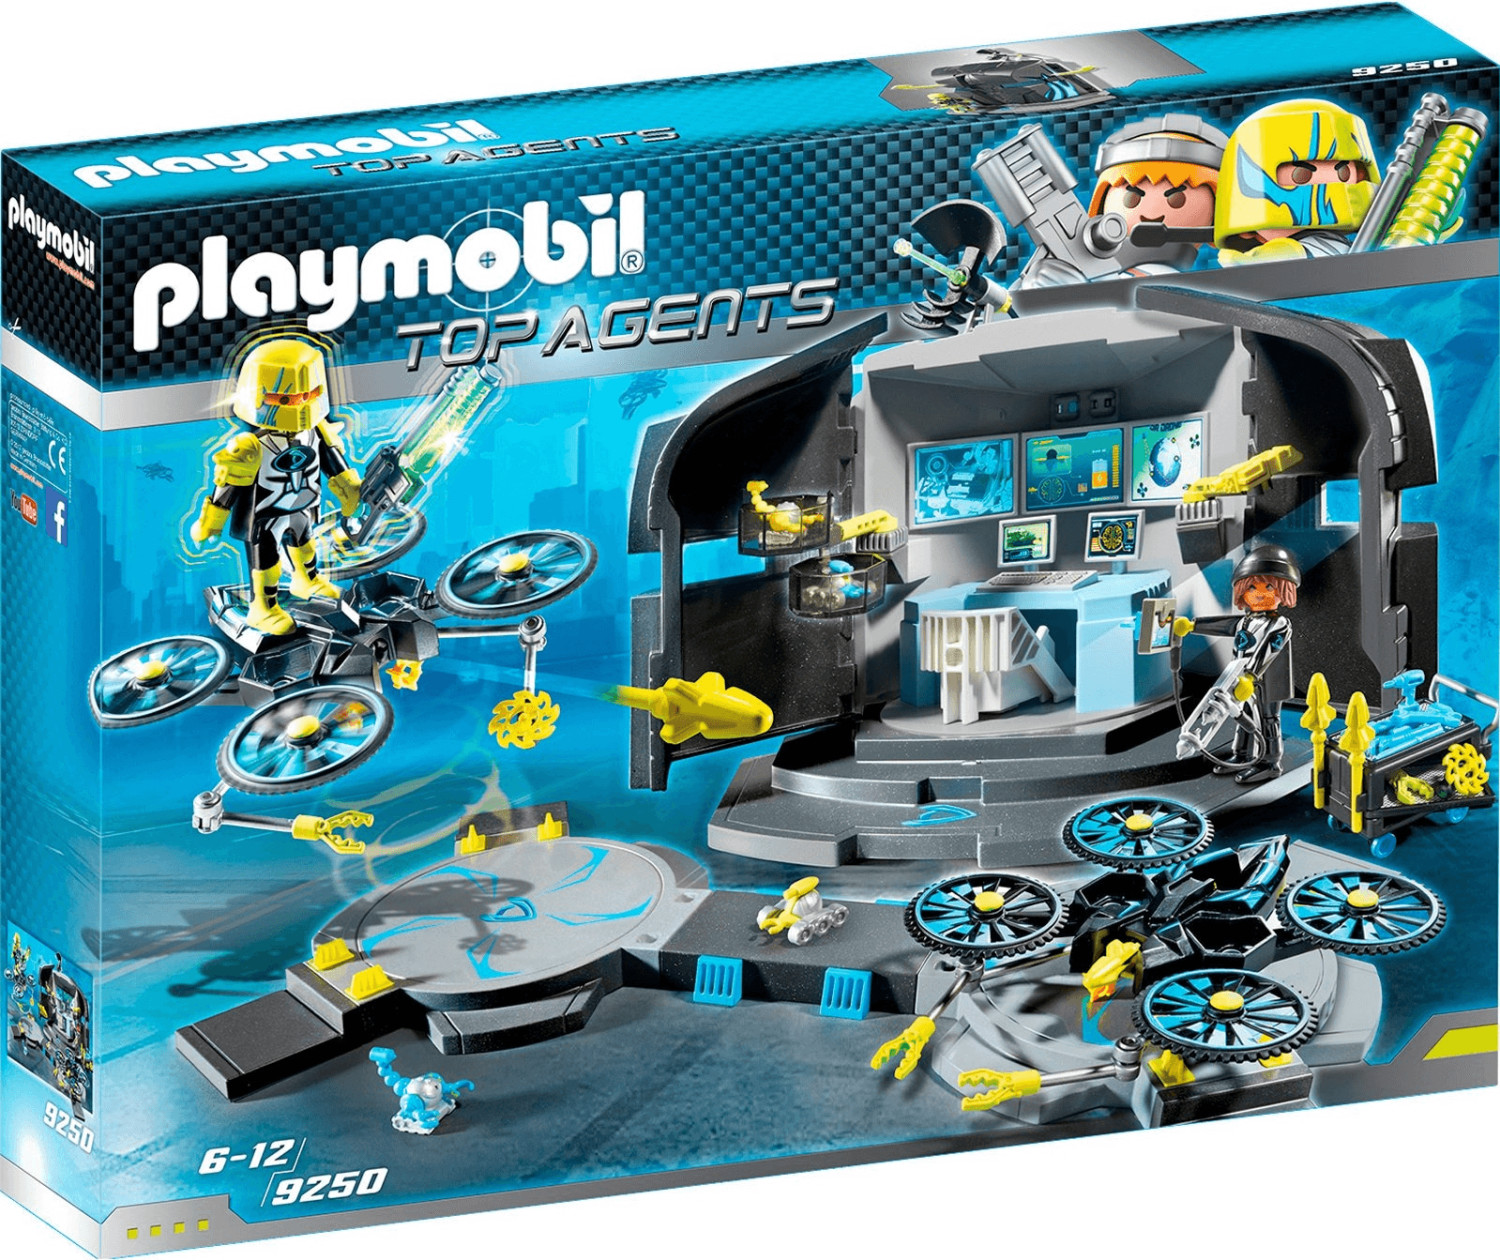 Playmobil Top Agents - Dr. Drone's Command Center (9250)